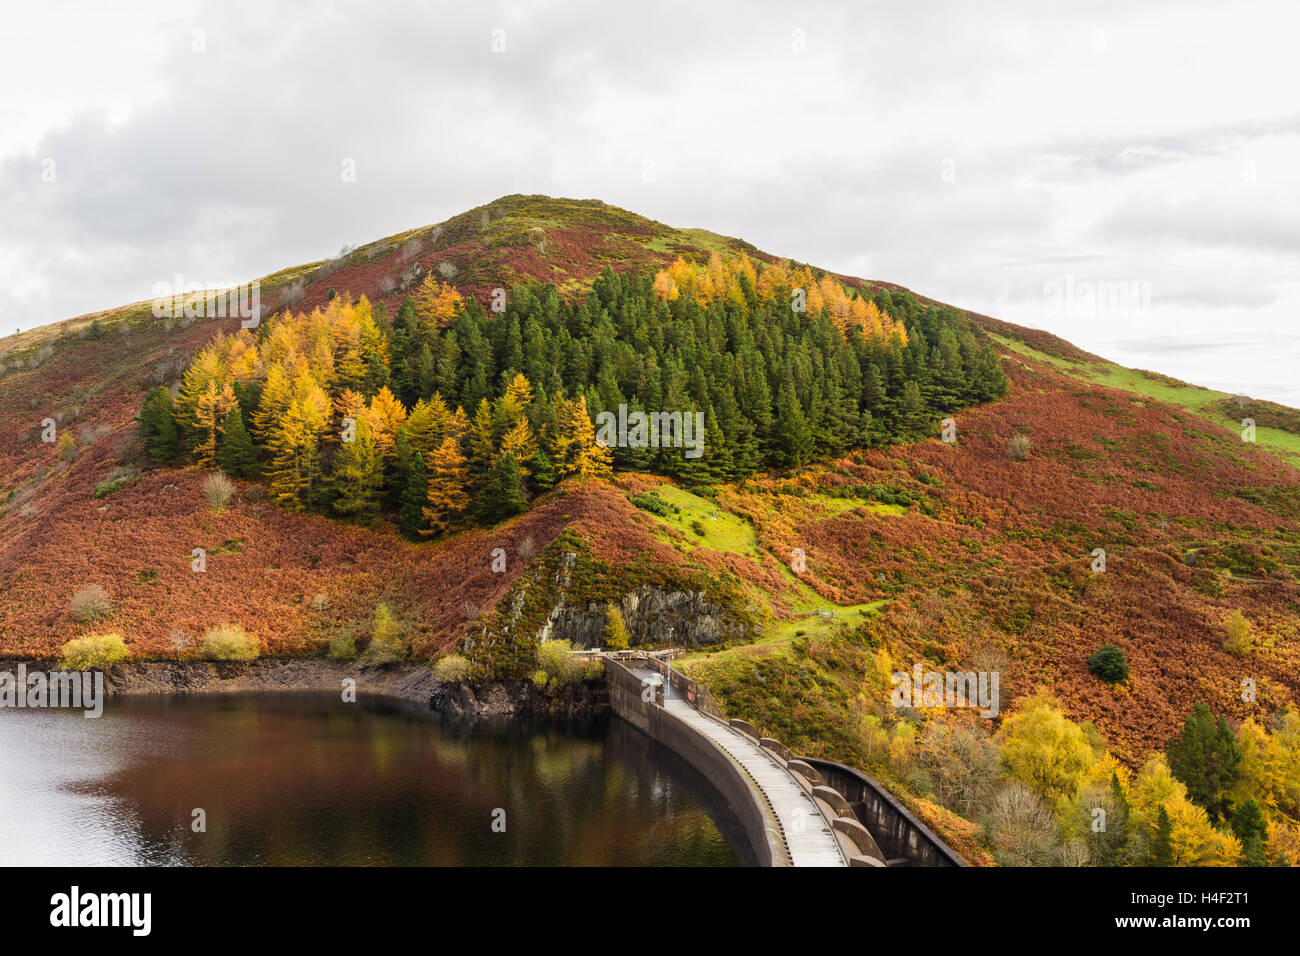 View from above of the Clywedog reservoir and dam. Llanidloes, Powys, Wales, United Kingdom. Stock Photo